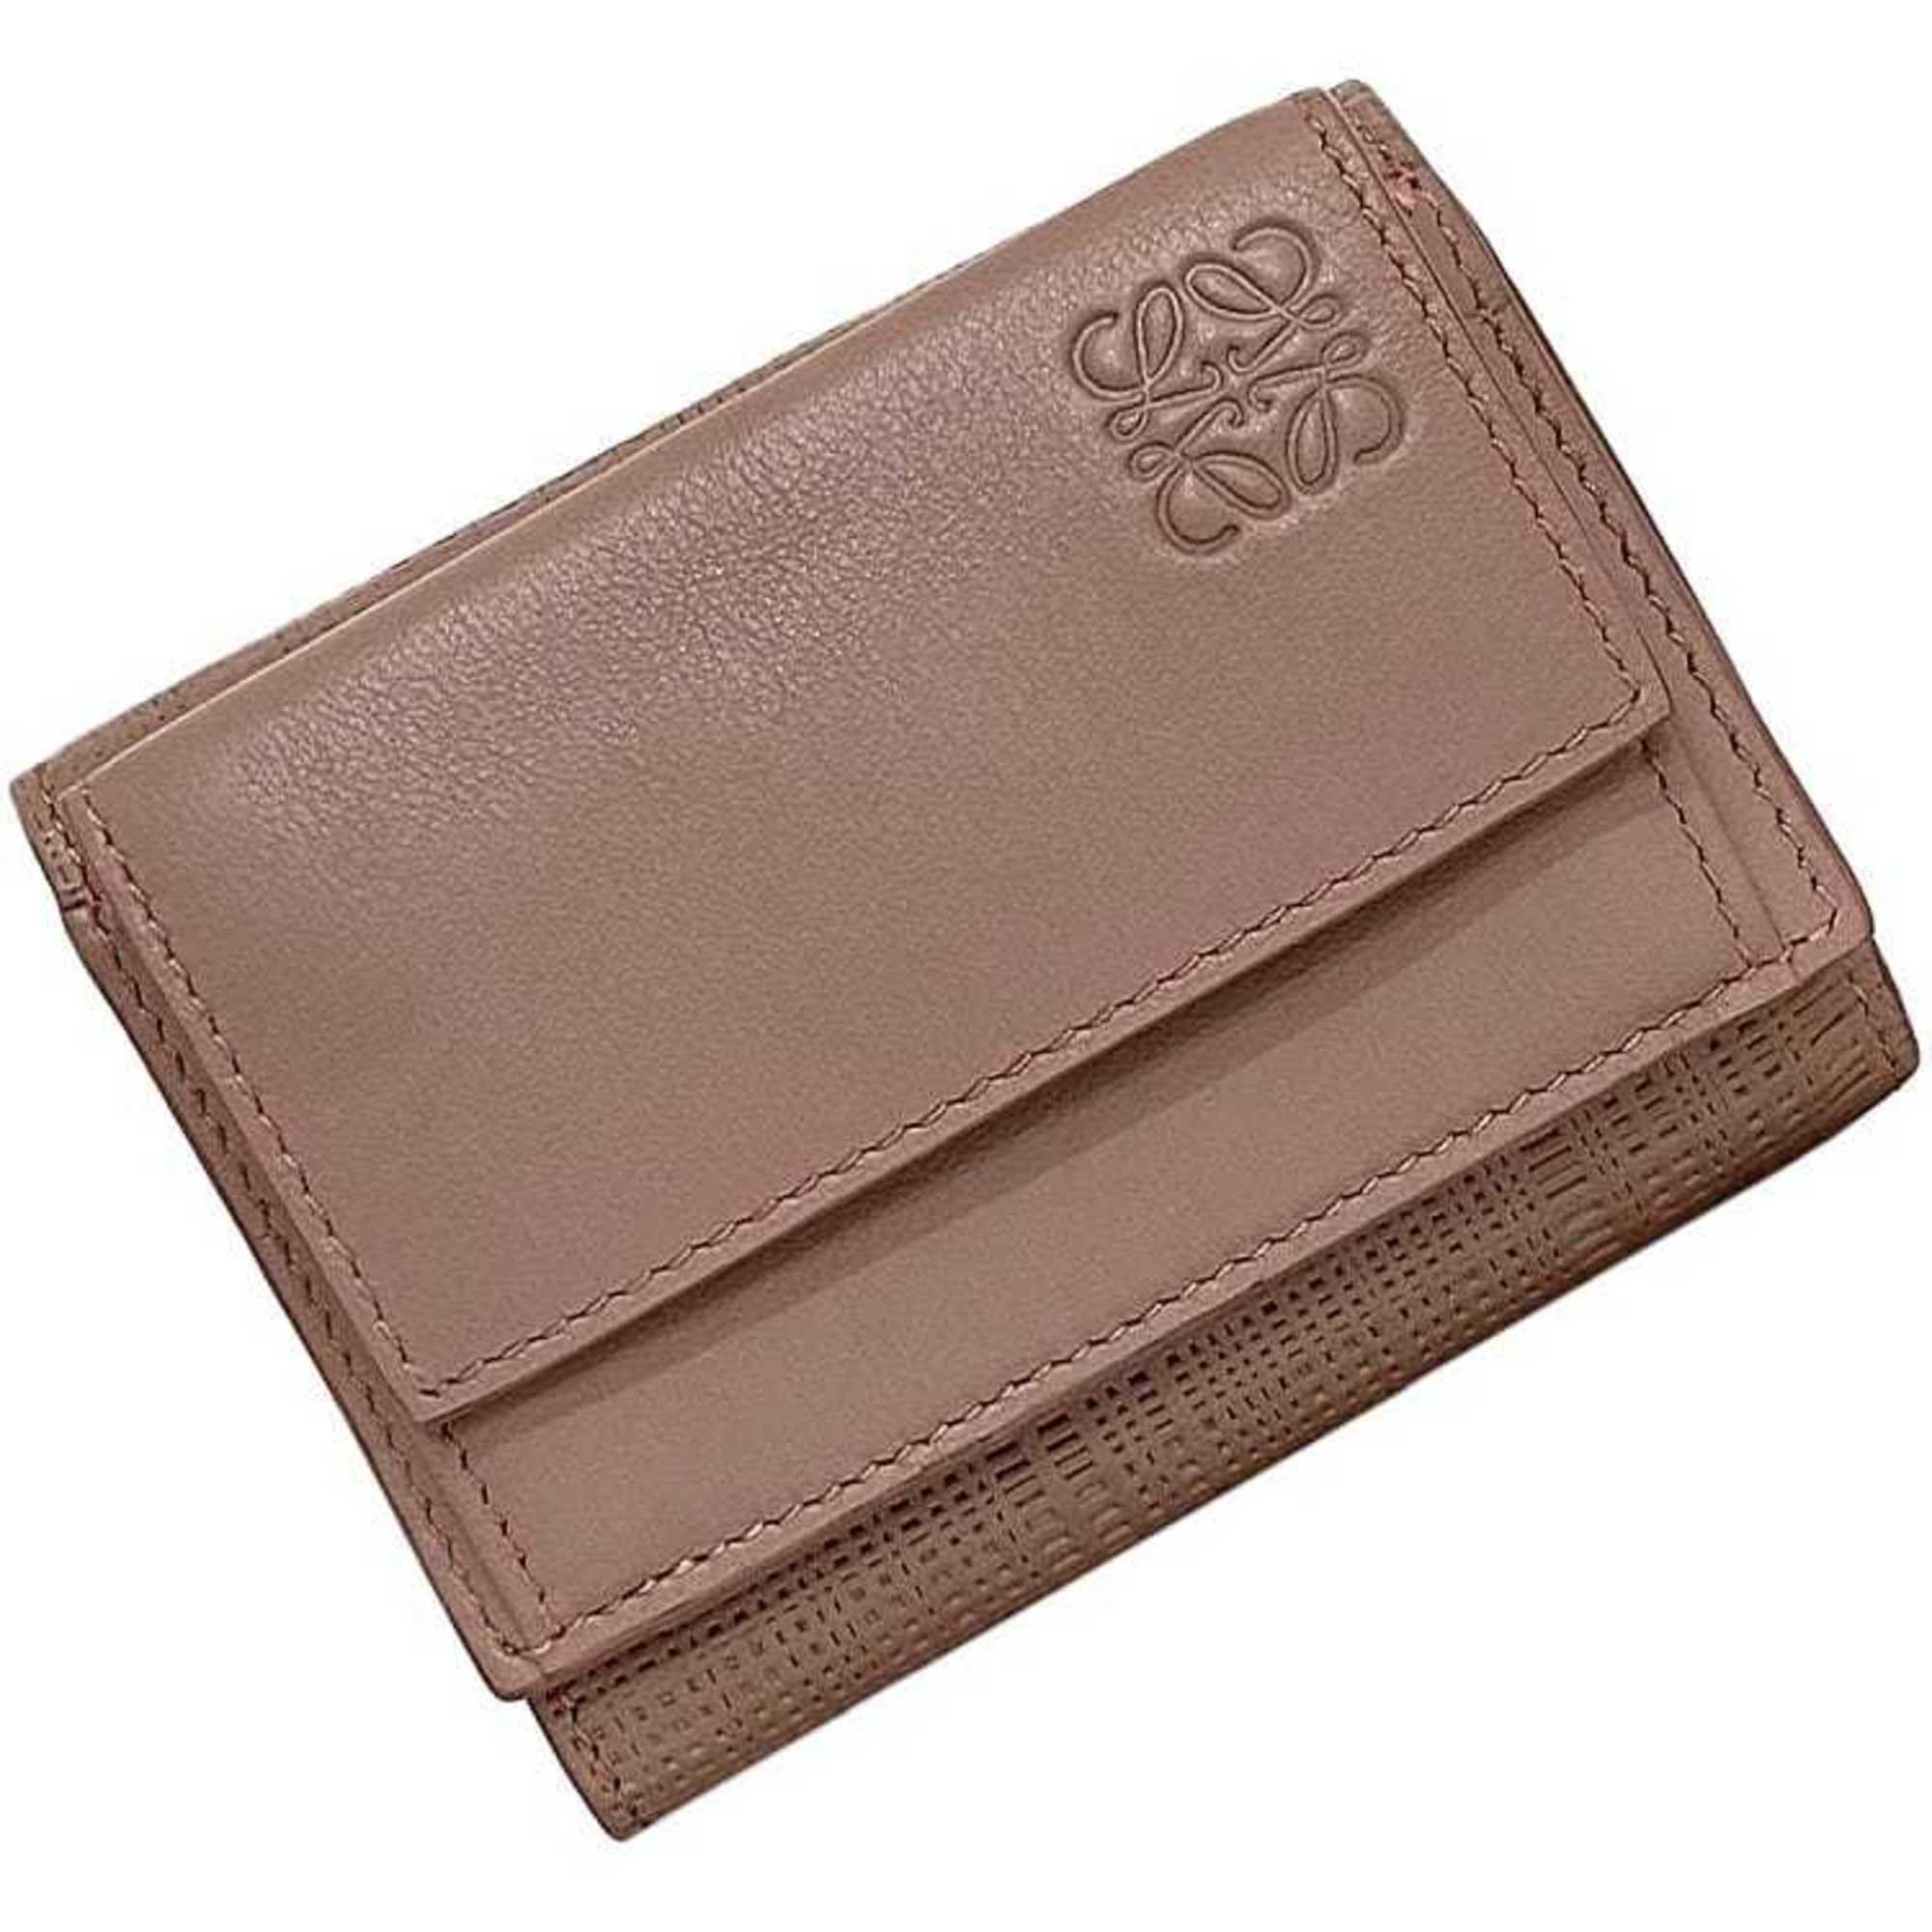 LOEWE Tri-fold Wallet Pink Beige Repeat Anagram 101.88.S26 f-20475 Leather Grained Compact